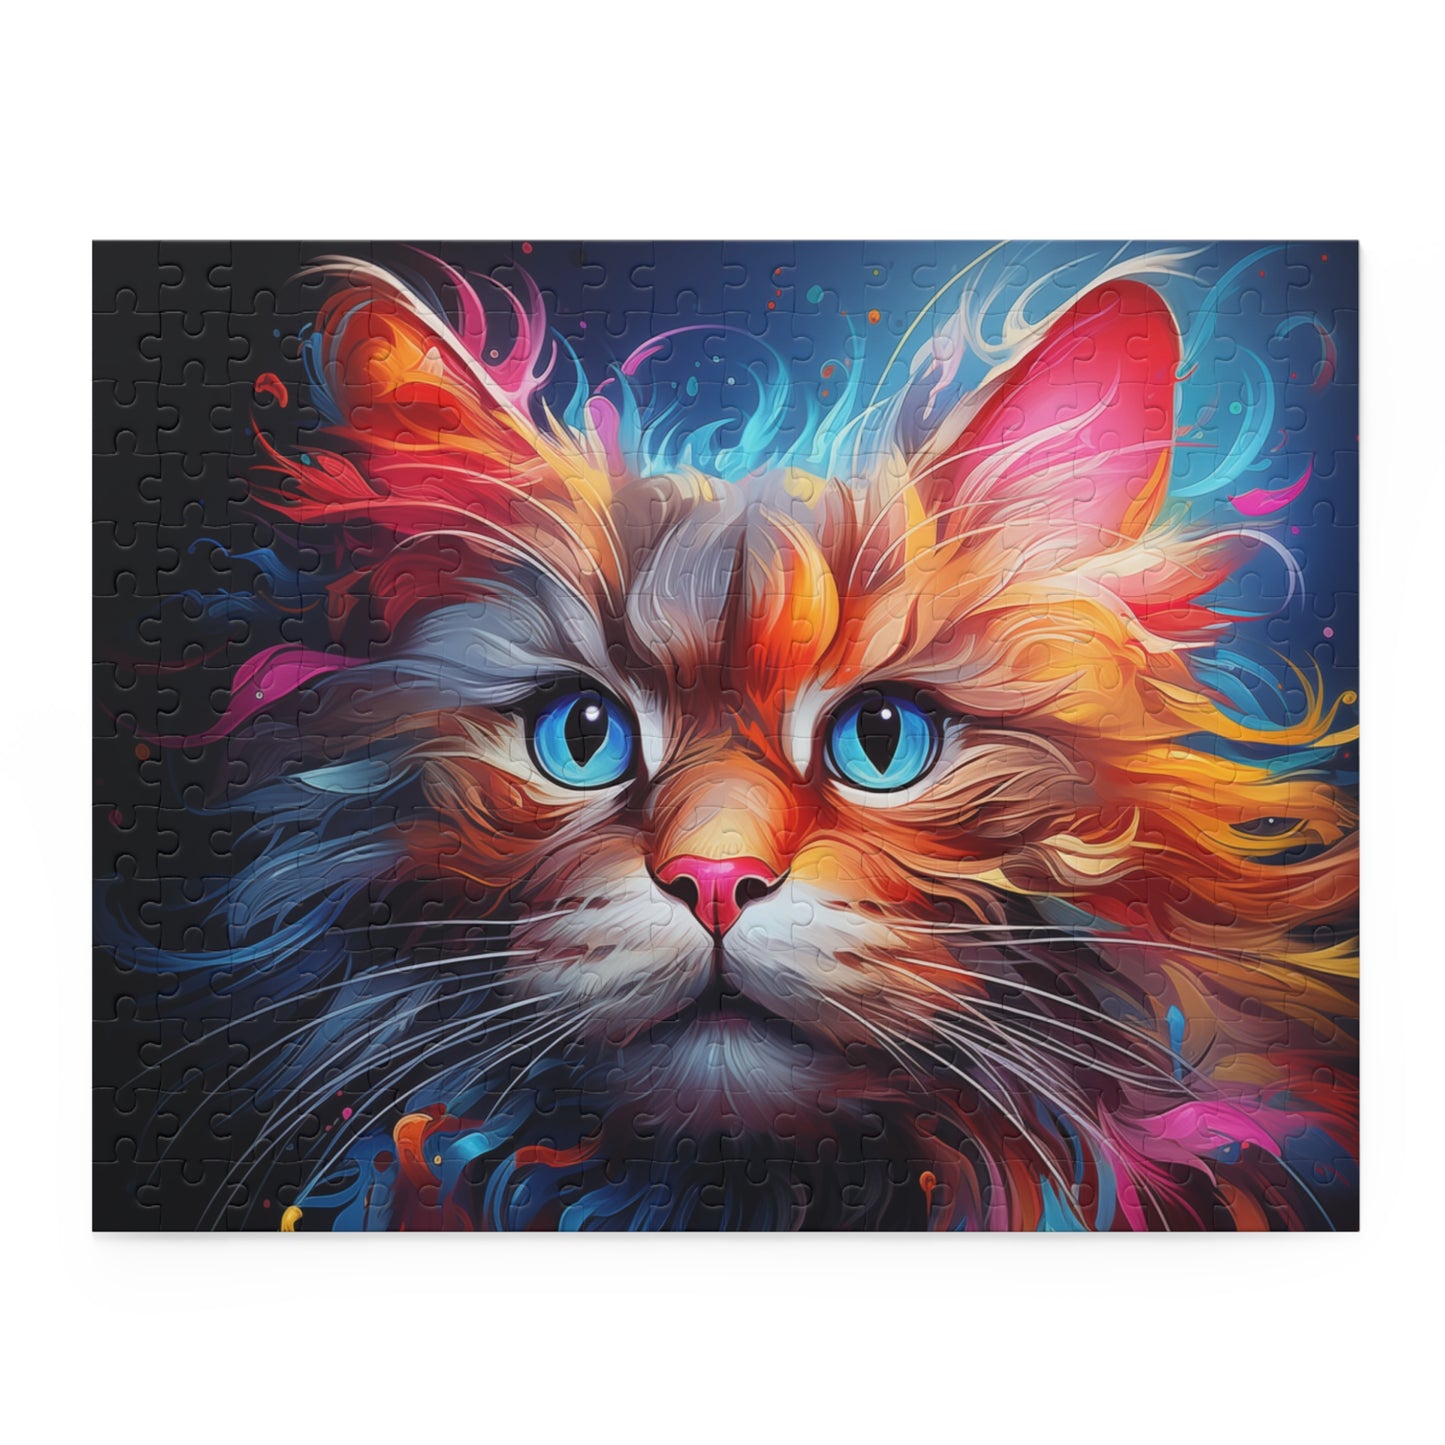 Abstract Cat Jigsaw Puzzle Adult Birthday Business Jigsaw Puzzle Gift for Him Funny Humorous Indoor Outdoor Game Gift For Her Online-3